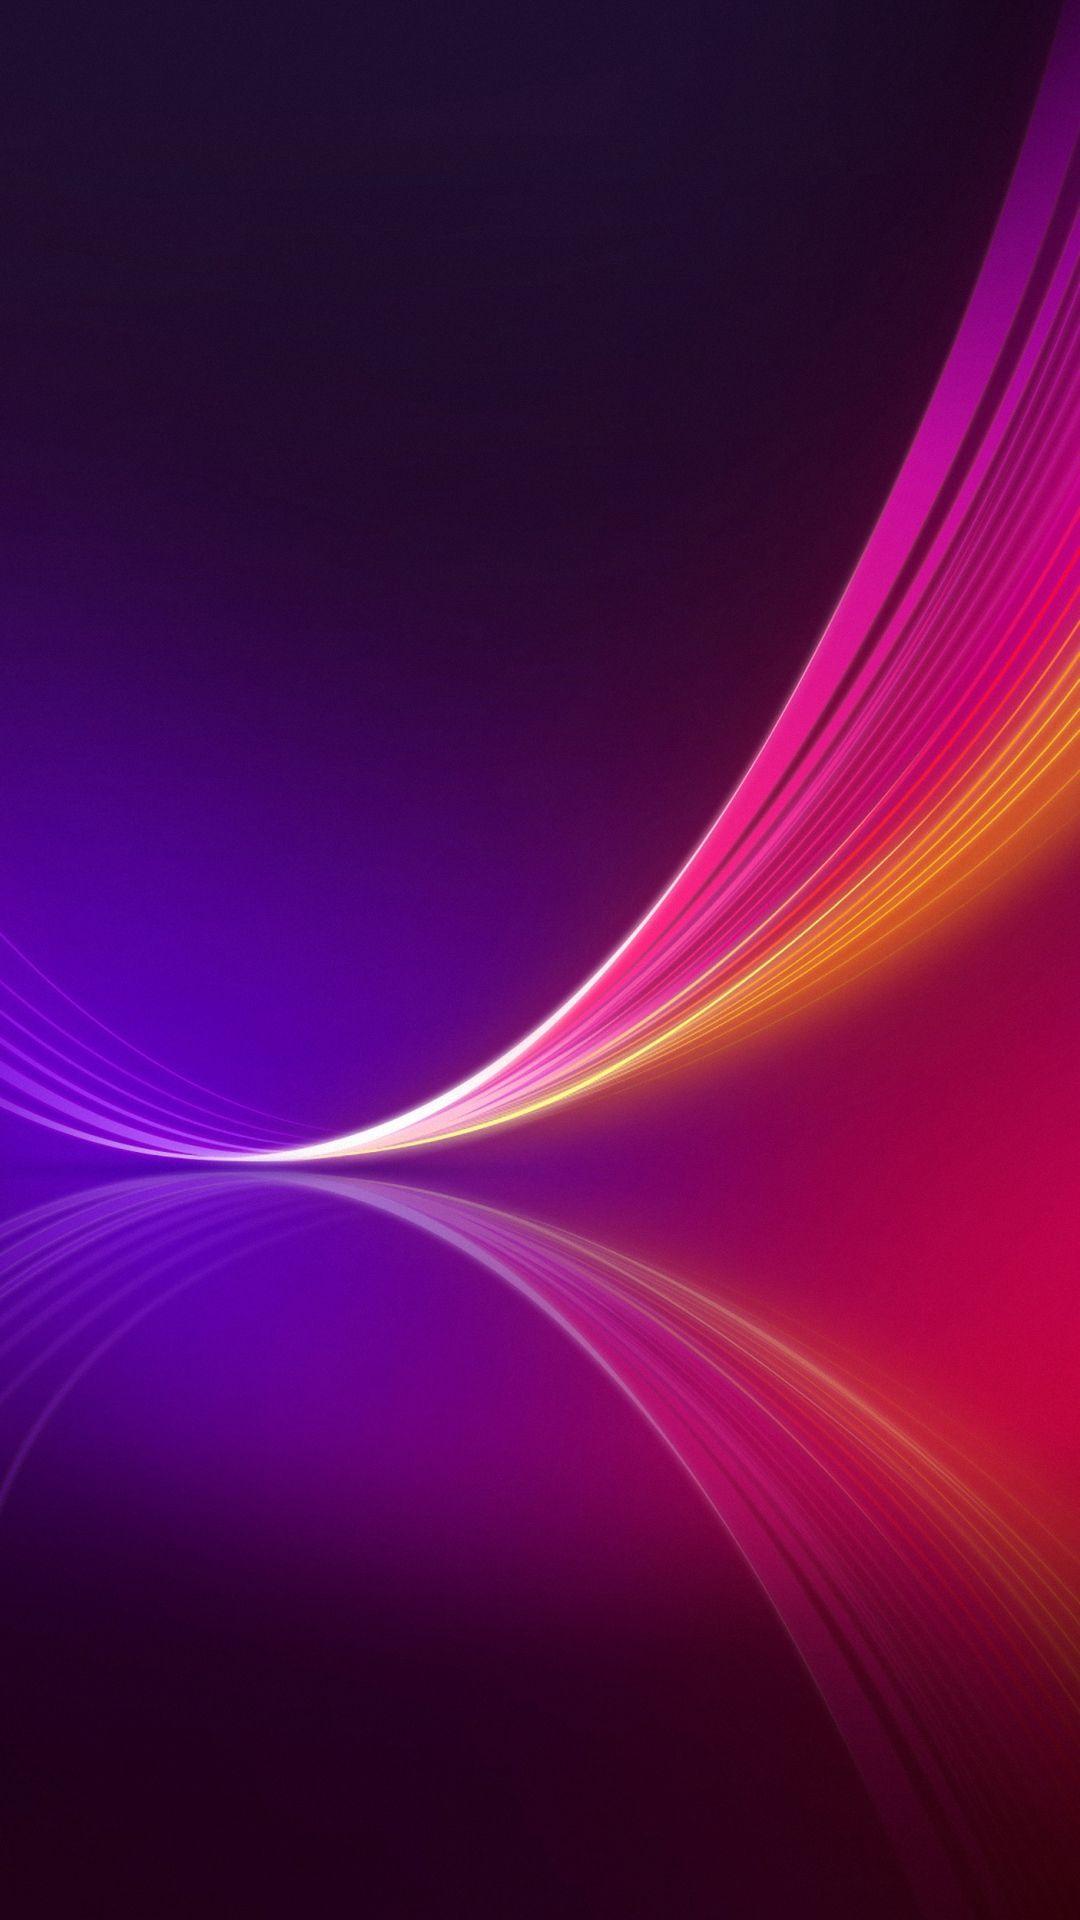 Latest Mobile 2020 Wallpapers - Wallpaper Cave